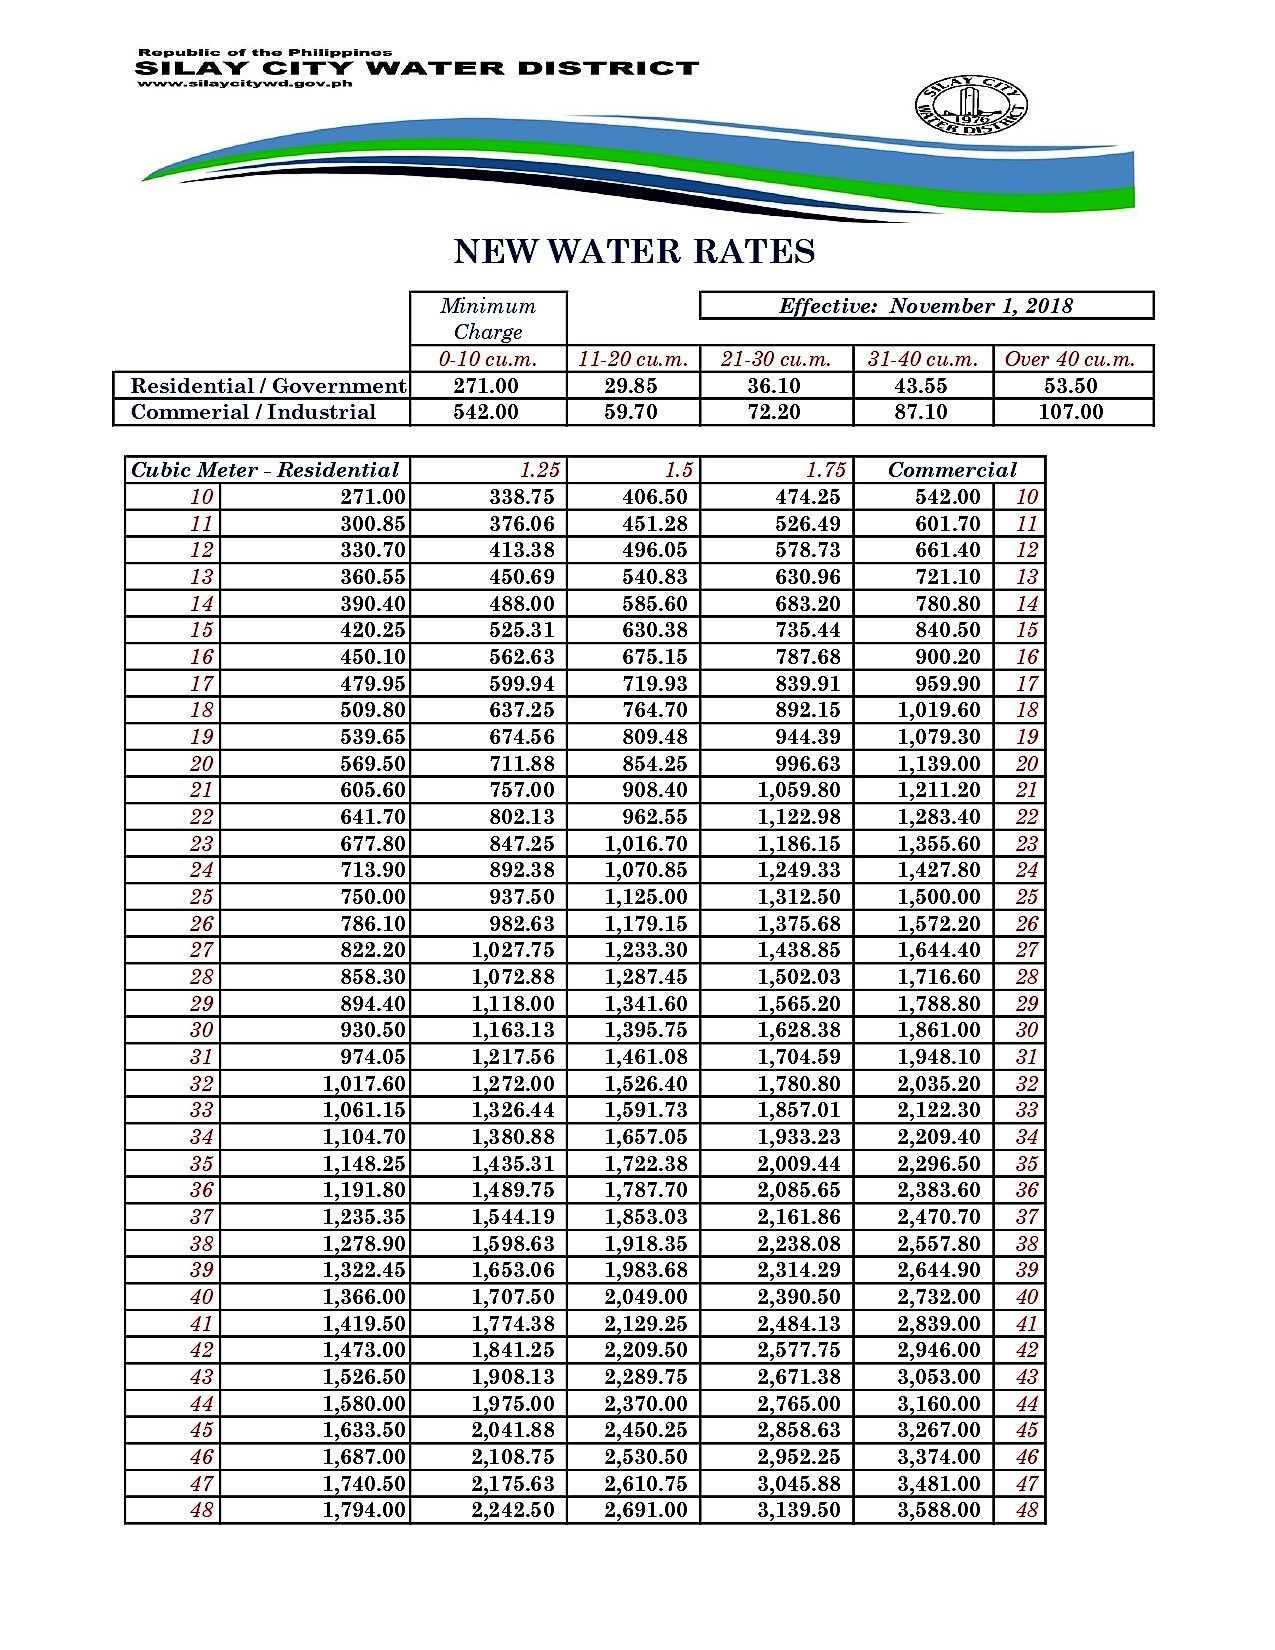 water-rates-silay-city-water-district